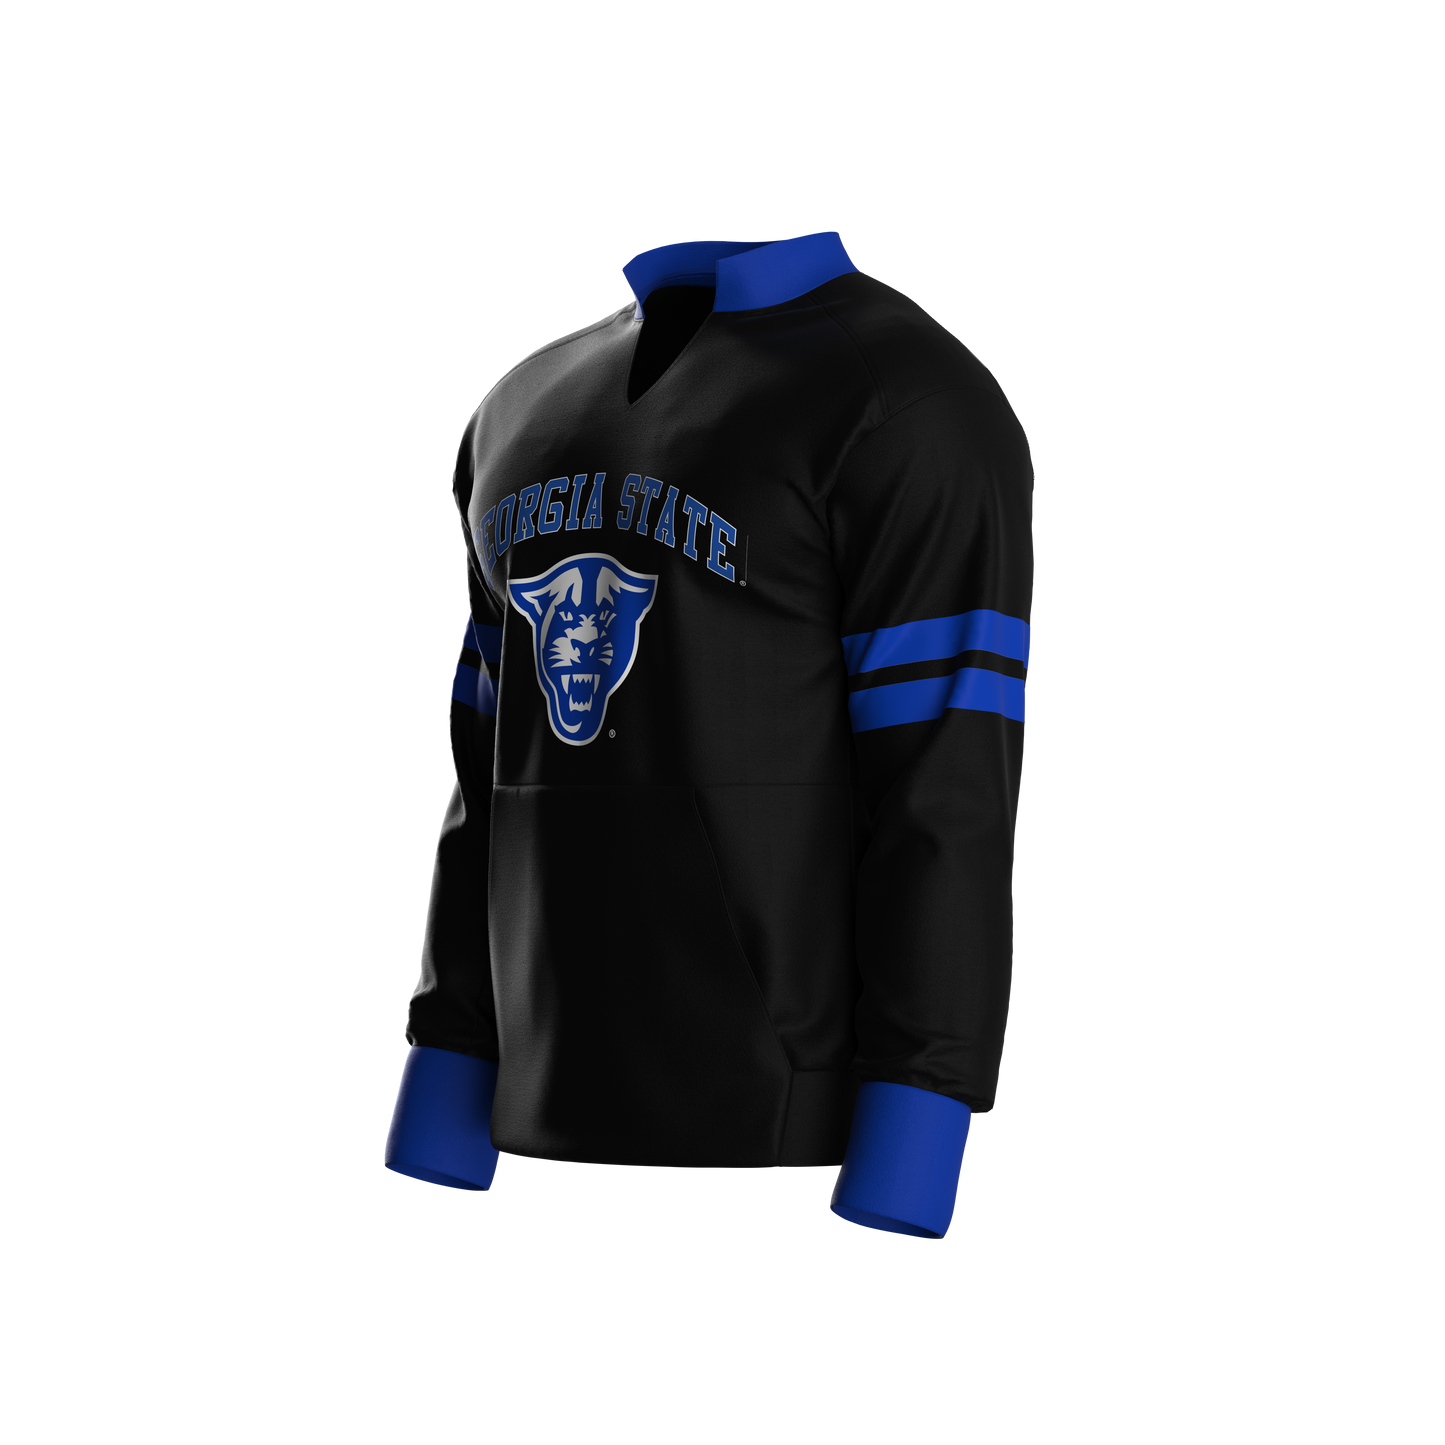 Georgia State University Home Pullover (adult)